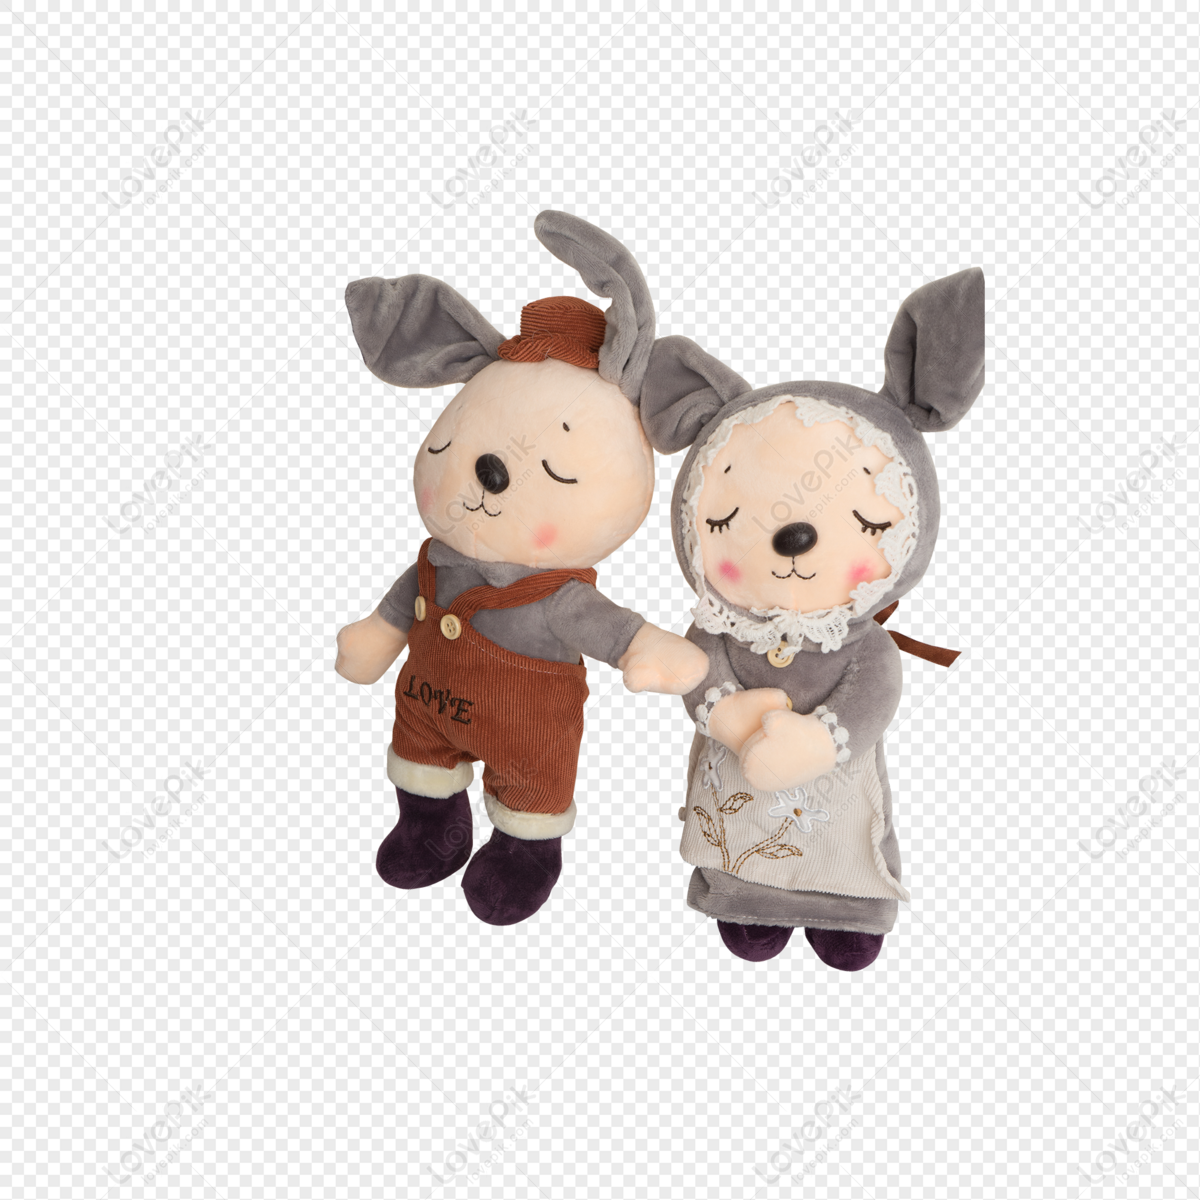 Plush Toys PNG Images With Transparent Background | Free Download On Lovepik